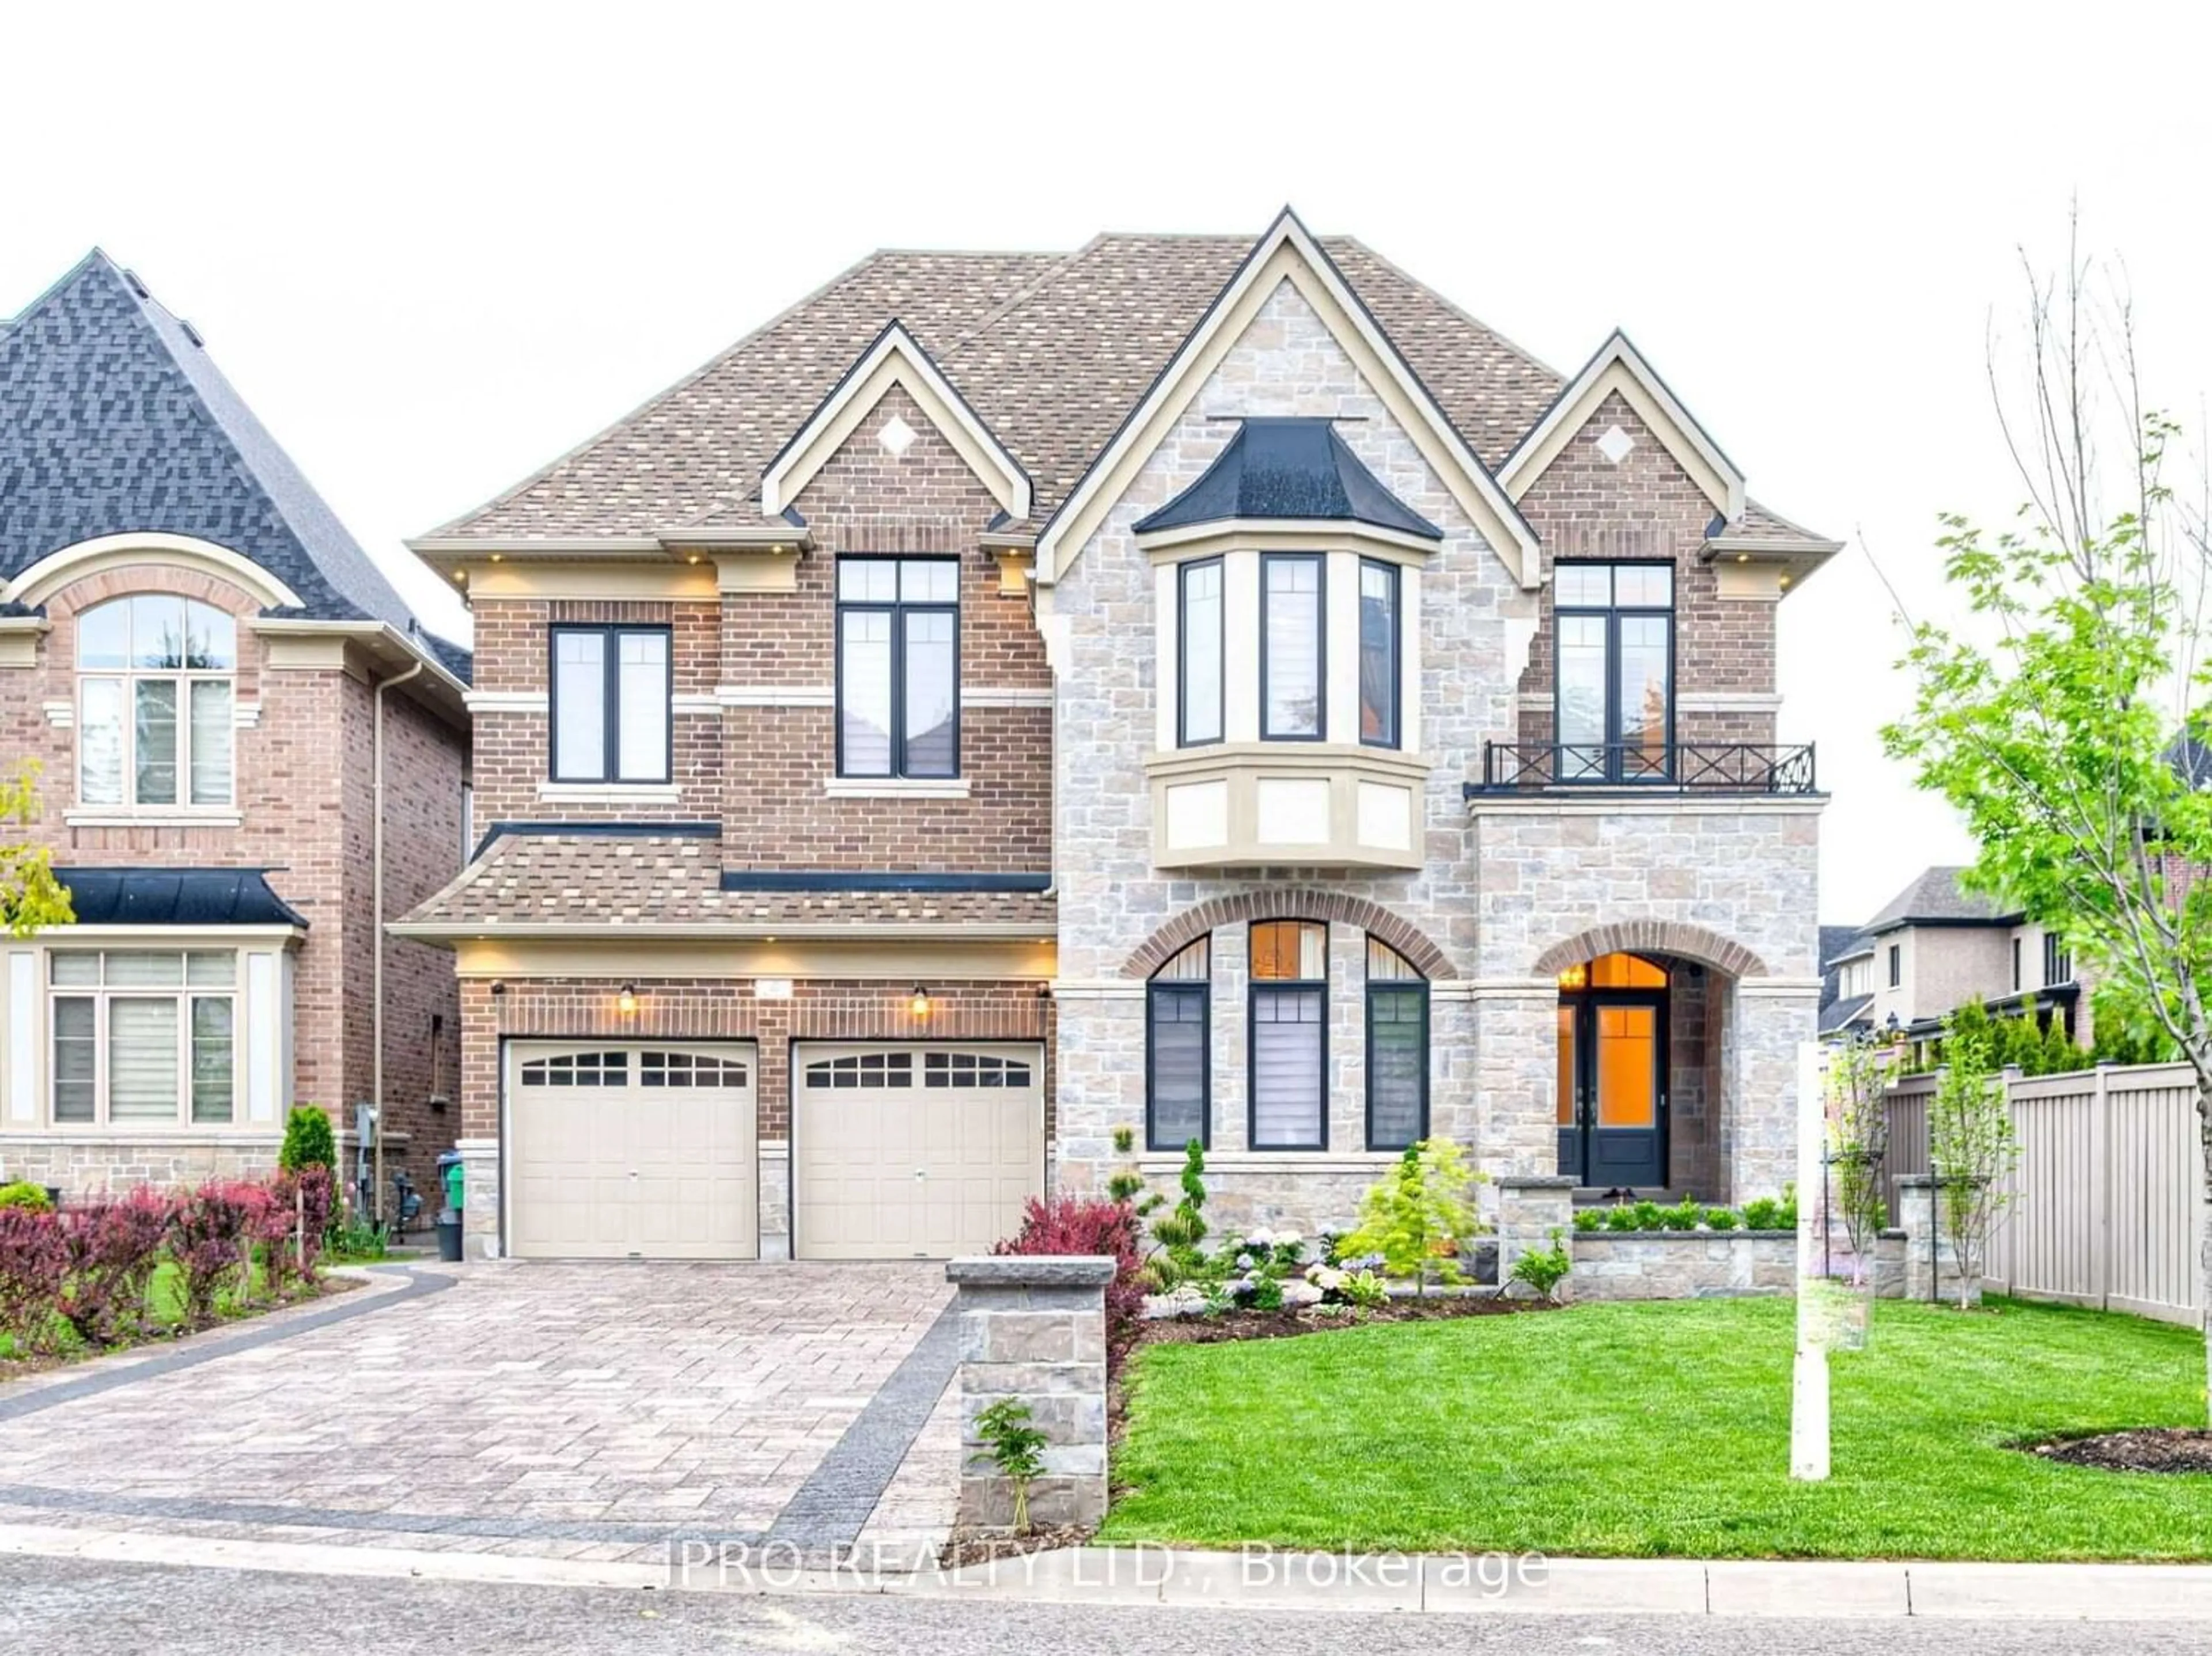 Home with brick exterior material for 51 Classic Dr, Brampton Ontario L6Y 5H3